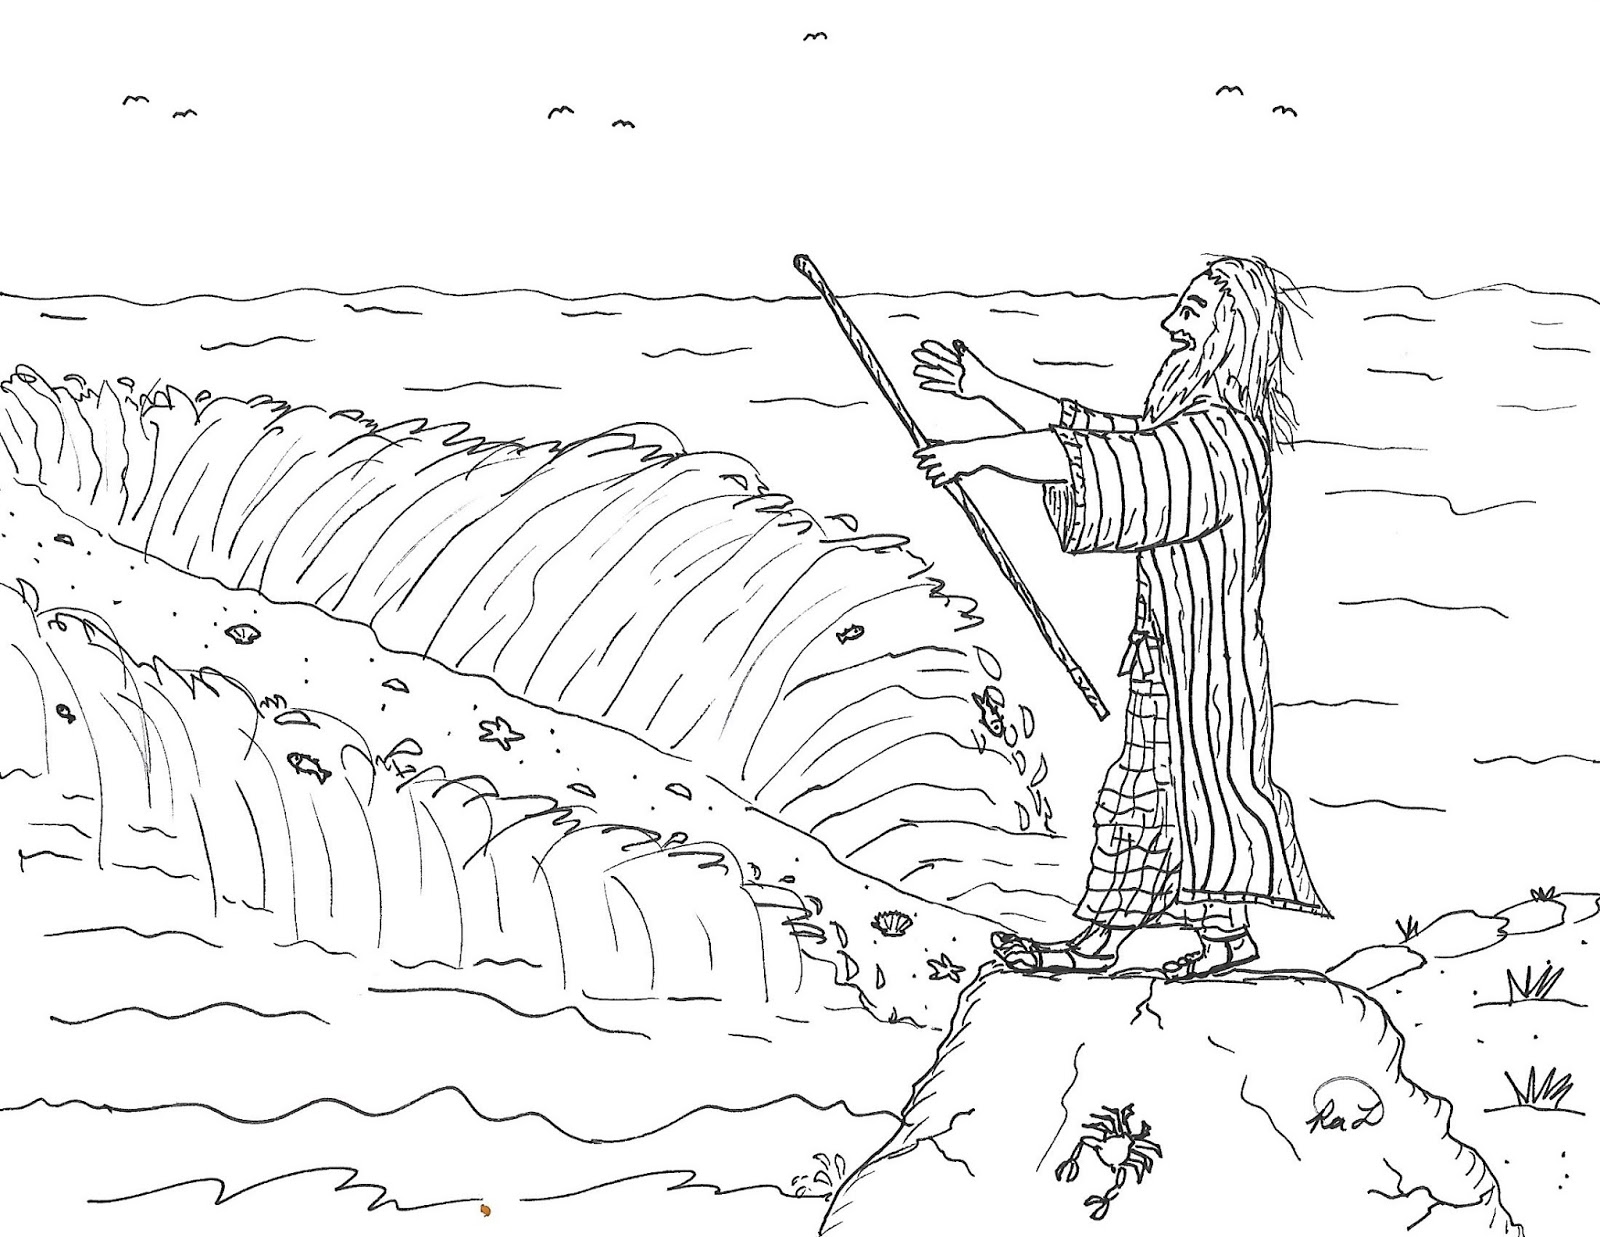 Robin's Great Coloring Pages: Moses Parting the Red Sea